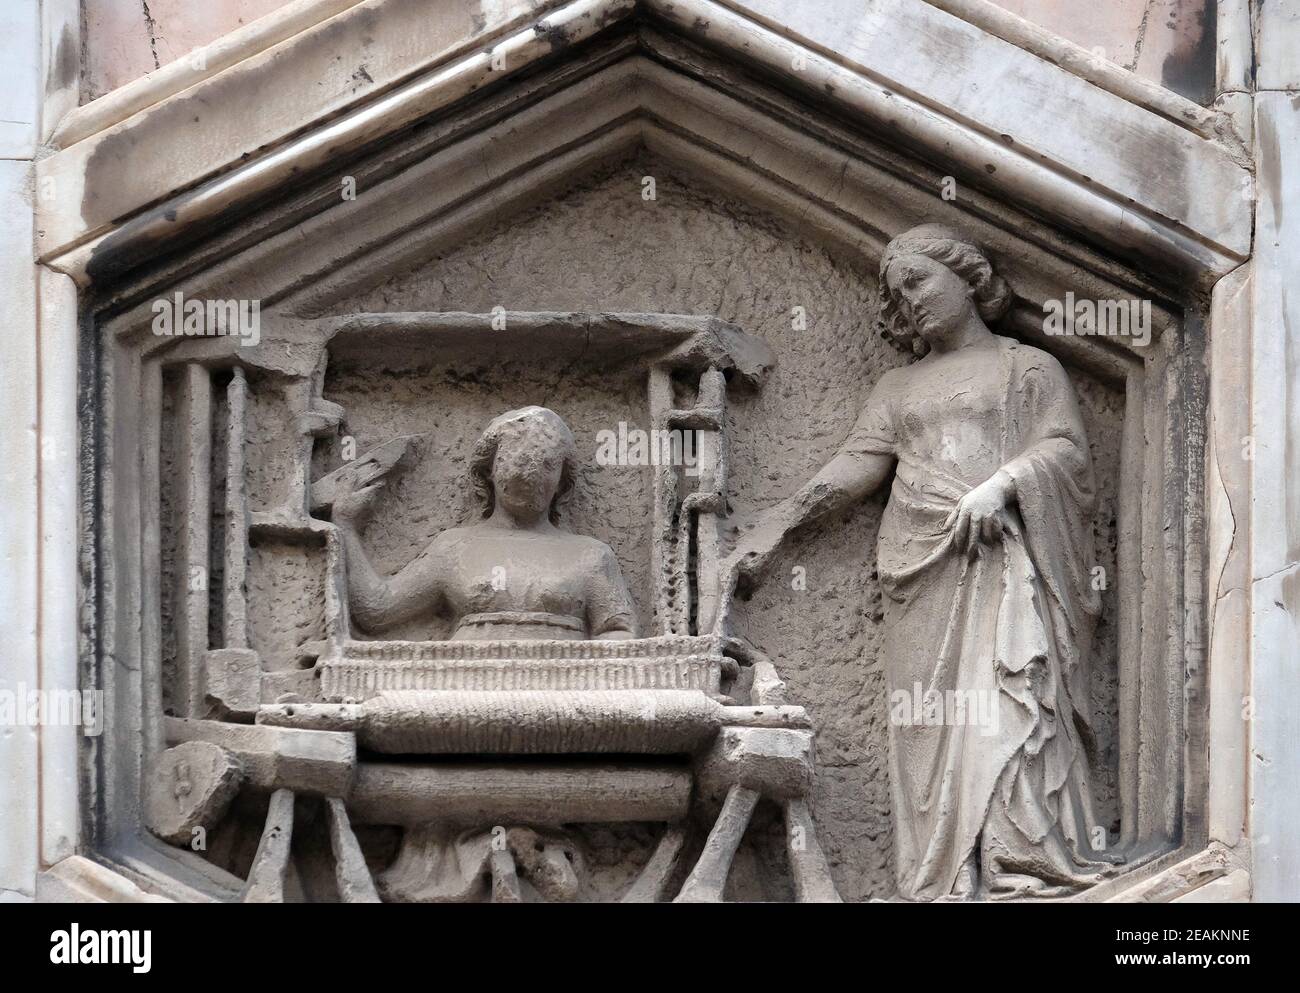 The Art of Weaving from the workshop of Andrea Pisano, Relief on Giotto Campanile of Cattedrale di Santa Maria del Fiore (Cathedral of Saint Mary of the Flower), Florence, Italy Stock Photo